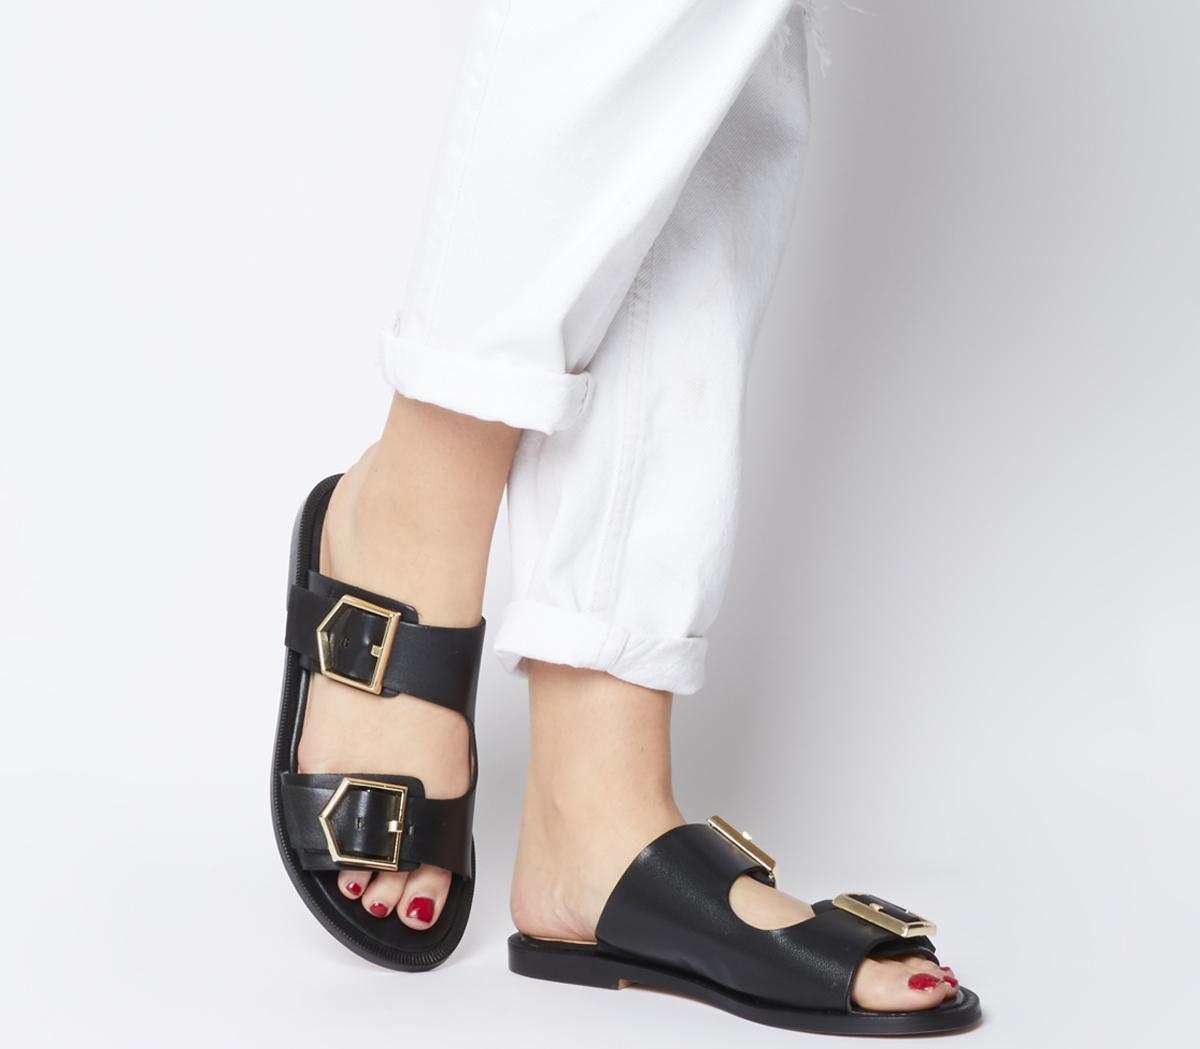 black shoes with gold buckle